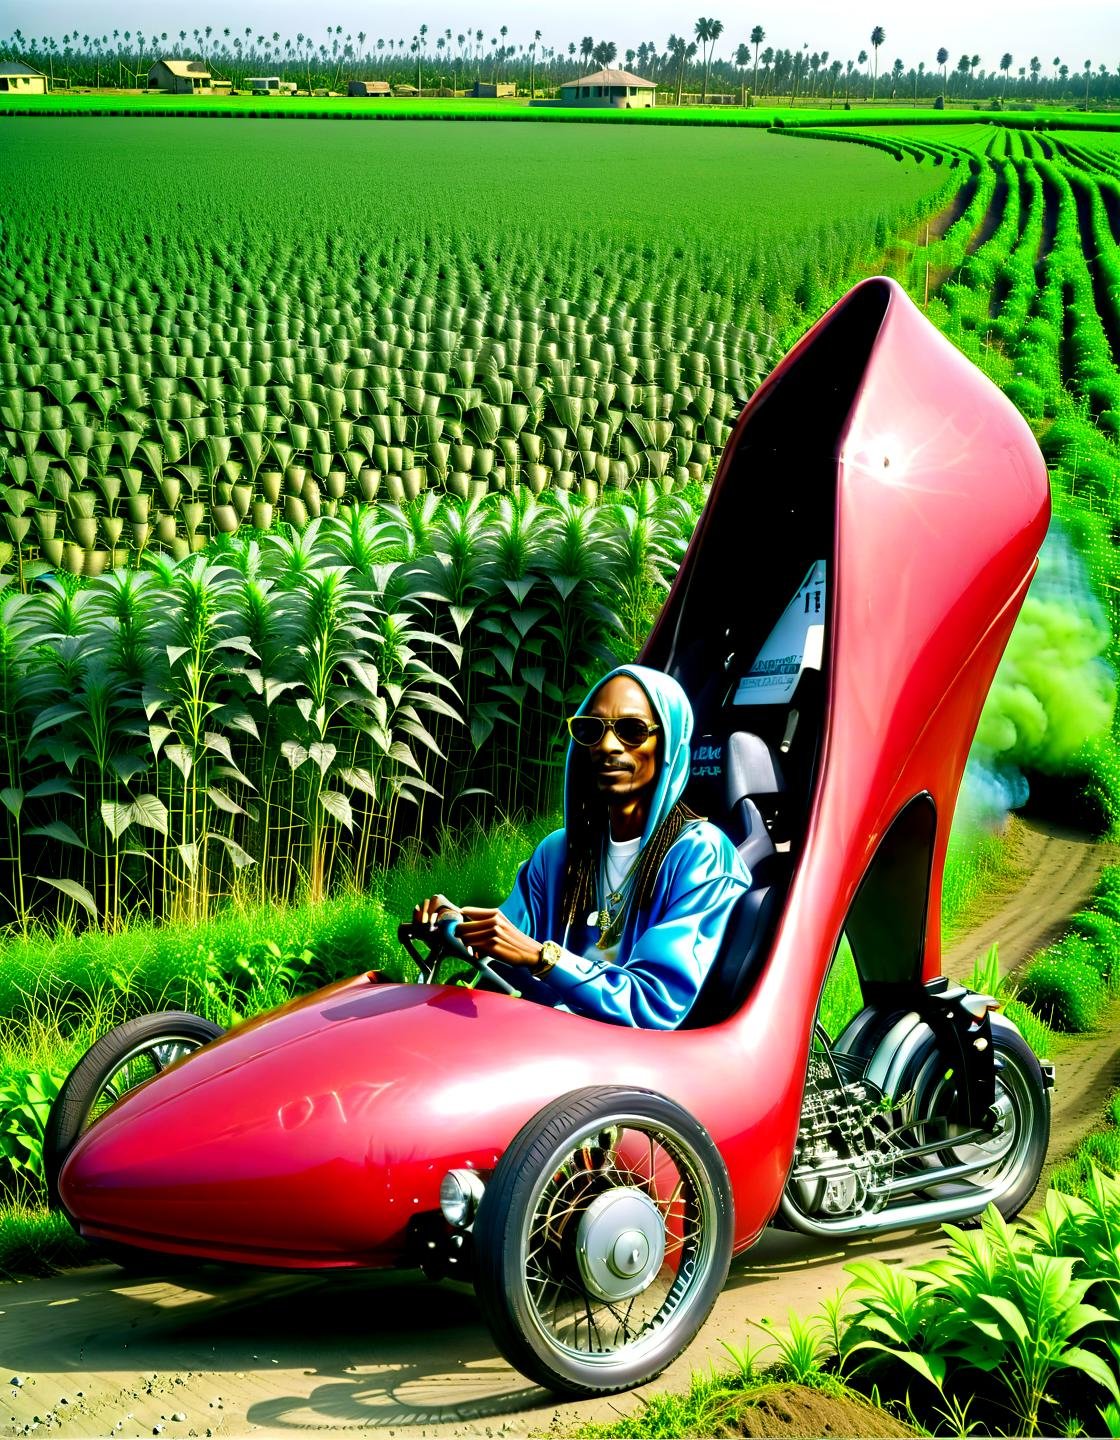 Photorealism (snoop dog:1.1) the rapper driving a blue (hhc:1.15),high heel car, bling bling, next to a field of weed, ganja, in jamaica,,, Photorealism, often for highly detailed representation, photographic accuracy, or visual illusion.